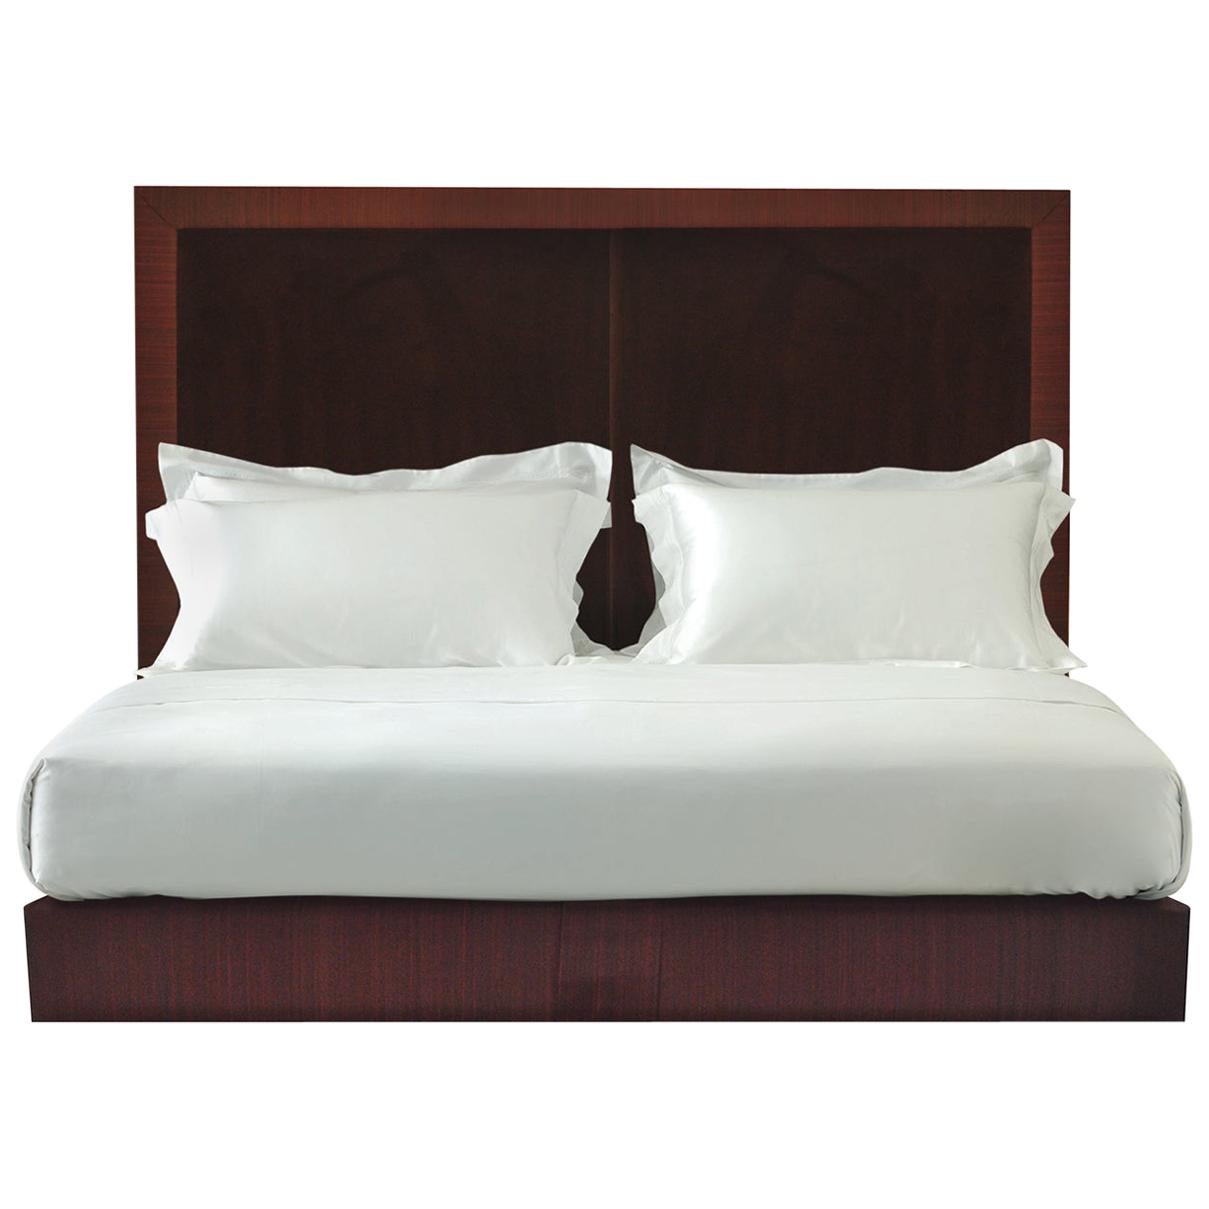 Handmade Savoir Max Bed in Velvet with a Horsehair Fabric Border, US King Size For Sale